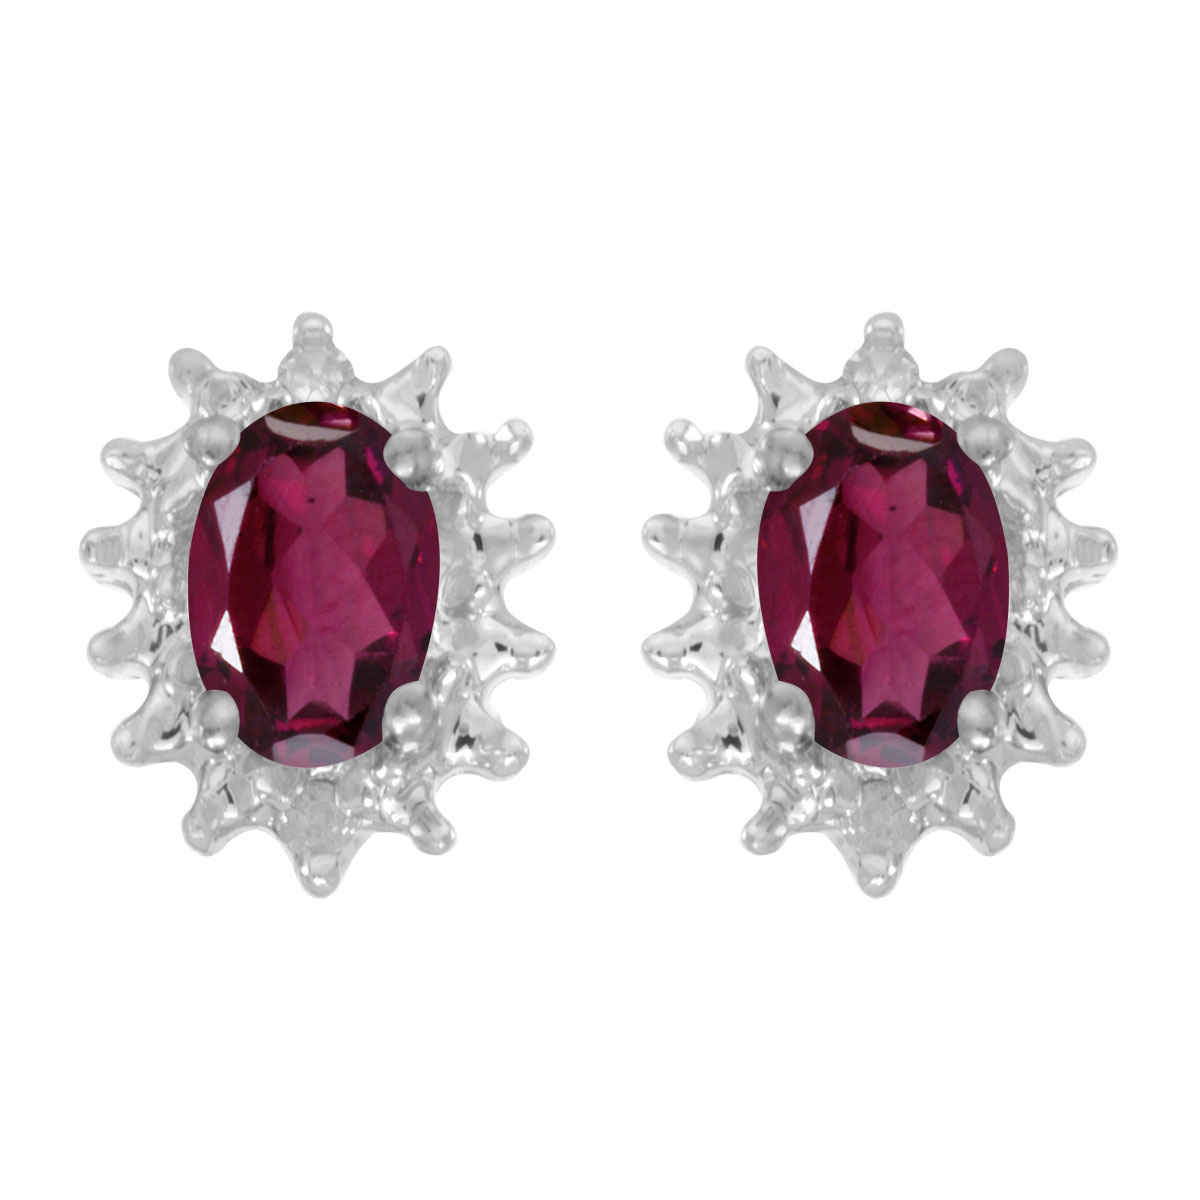 These 14k white gold oval rhodolite garnet and diamond earrings feature 6x4 mm genuine natural rh...